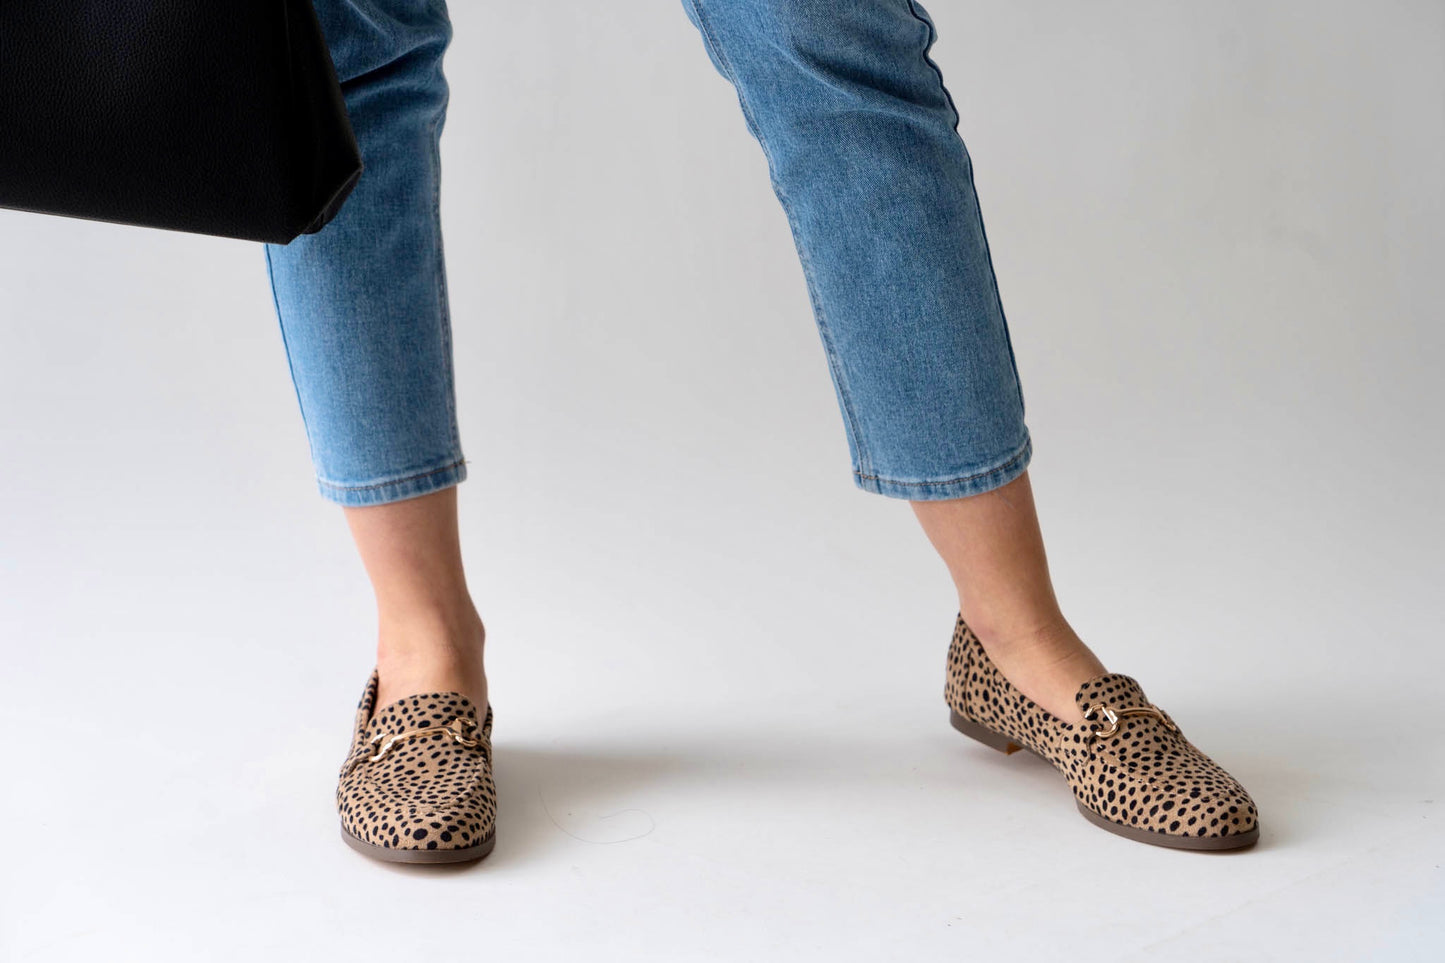 LOAFERS LEOPARD - SHOES